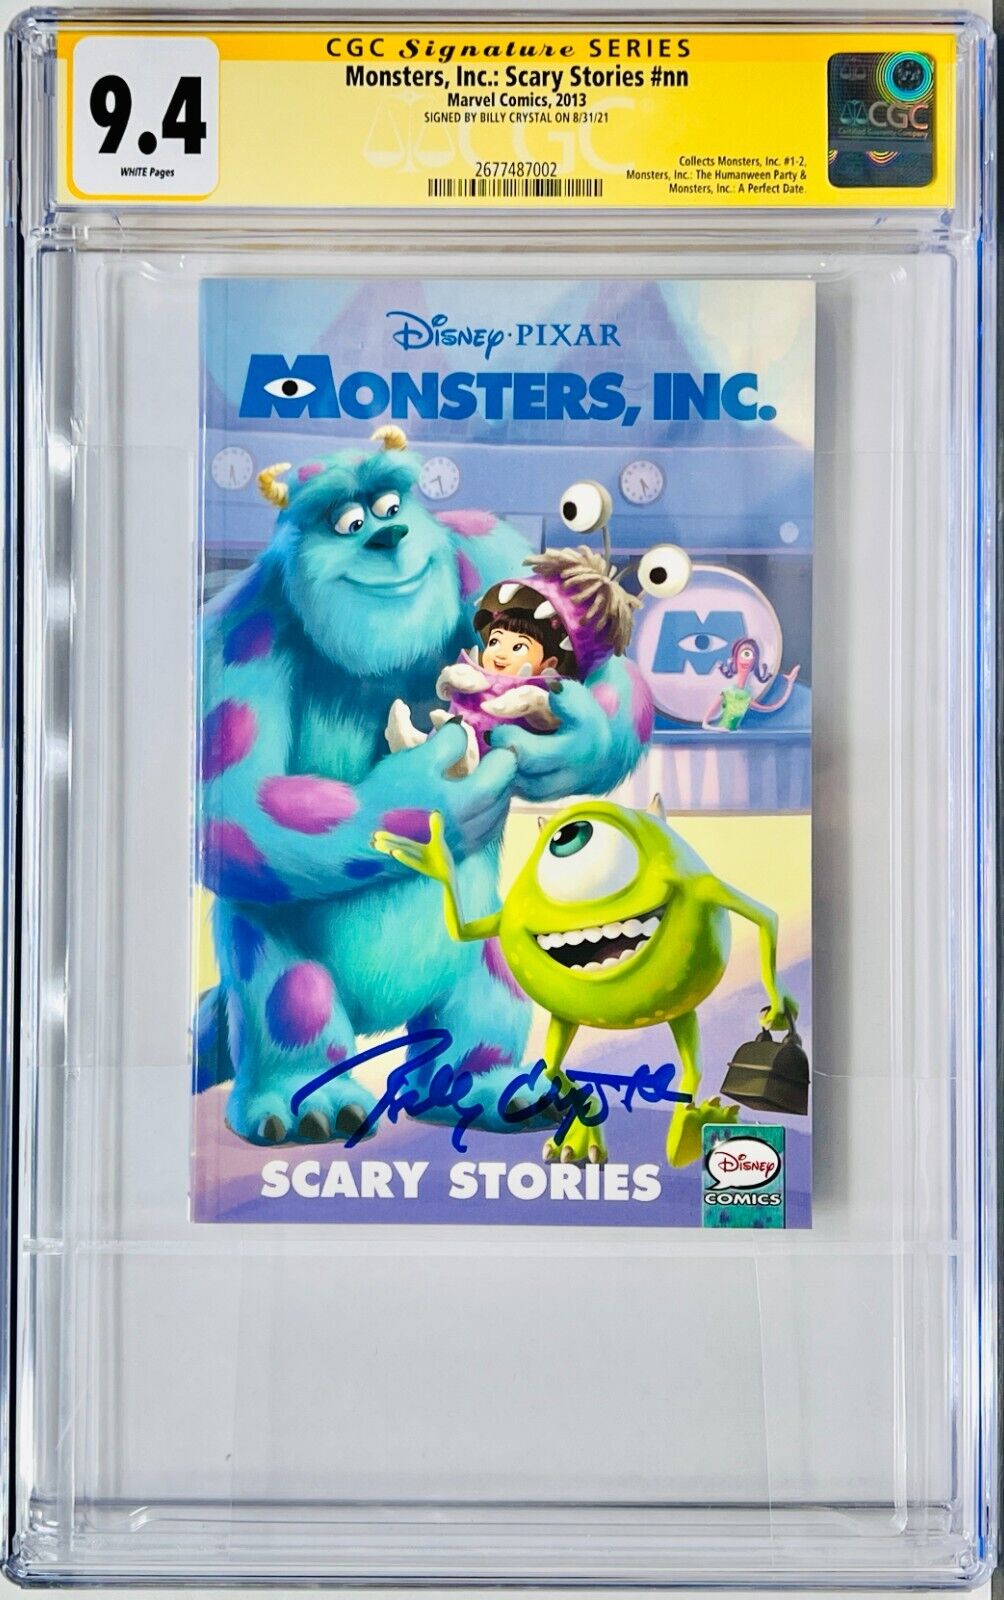 Billy Crystal Signed CGC Signature Series Graded 9.4 Monsters, Inc. Disney Comic